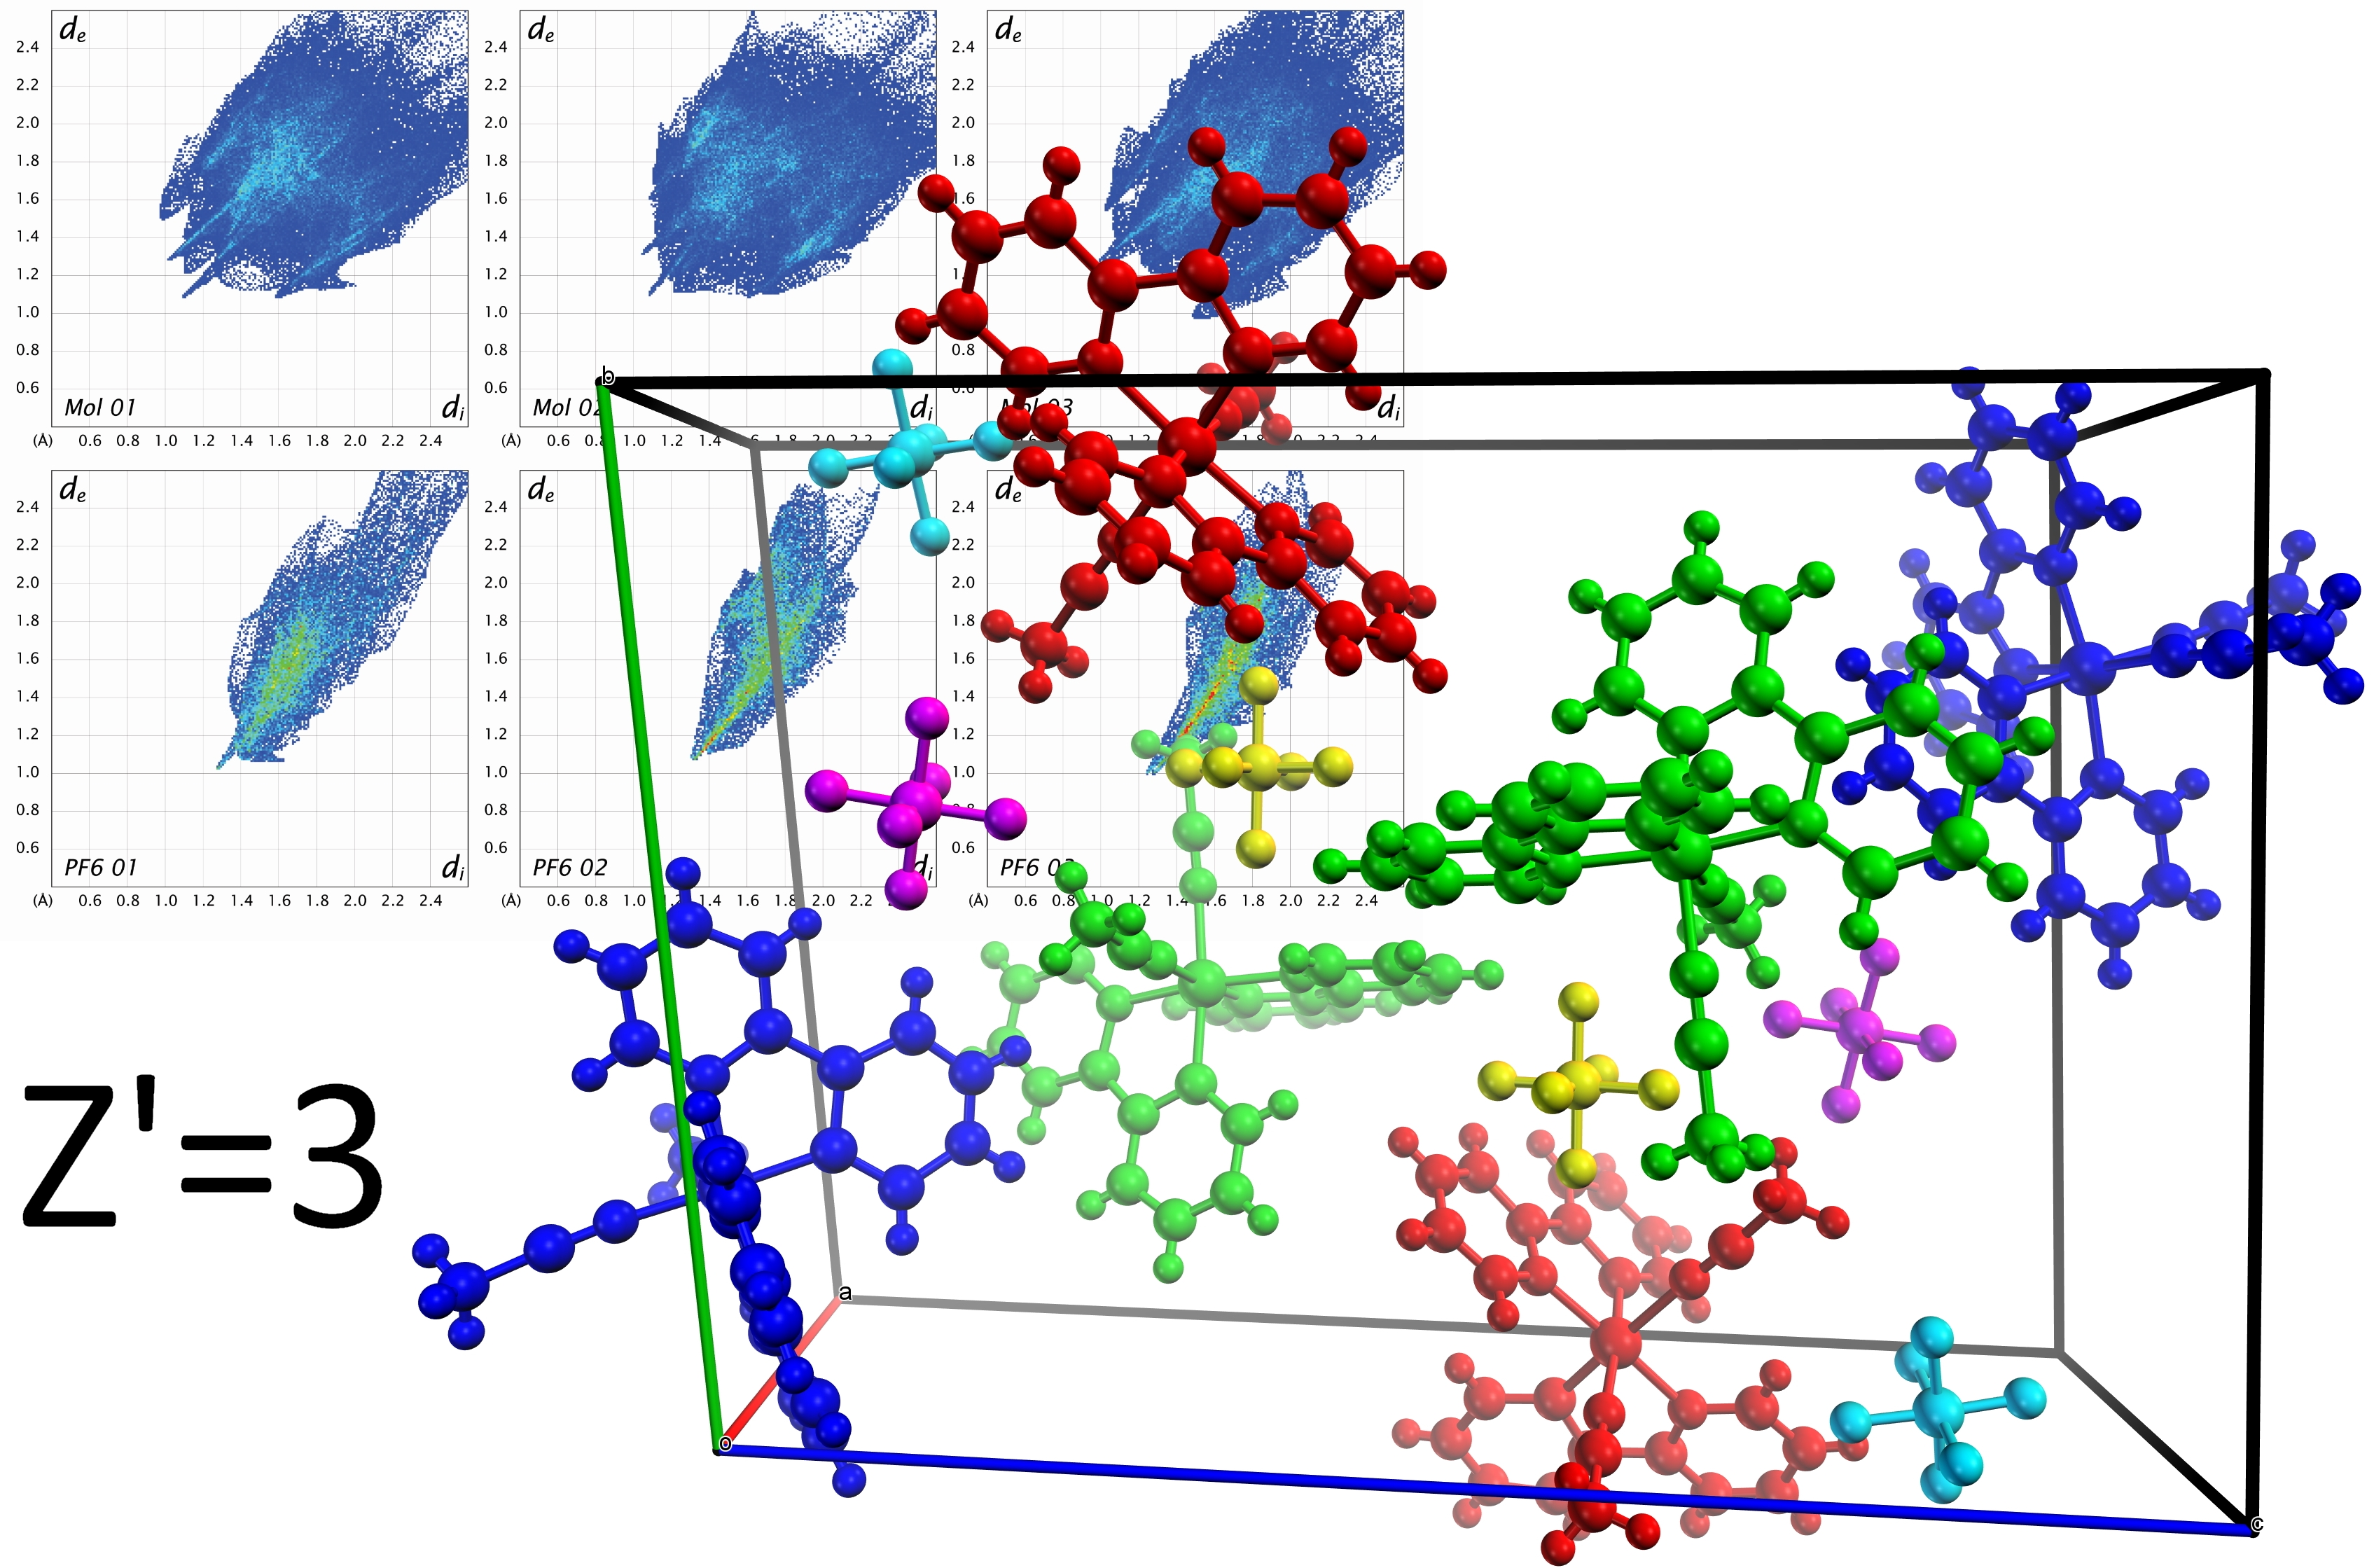 Crystals Free Full Text Synthesis And Crystal Structure Of Bis 2 Phenylpyridine C N Bis Acetonitrile Iridium Iii Hexafluorophosphate Showing Three Anion Cation Couples In The Asymmetric Unit